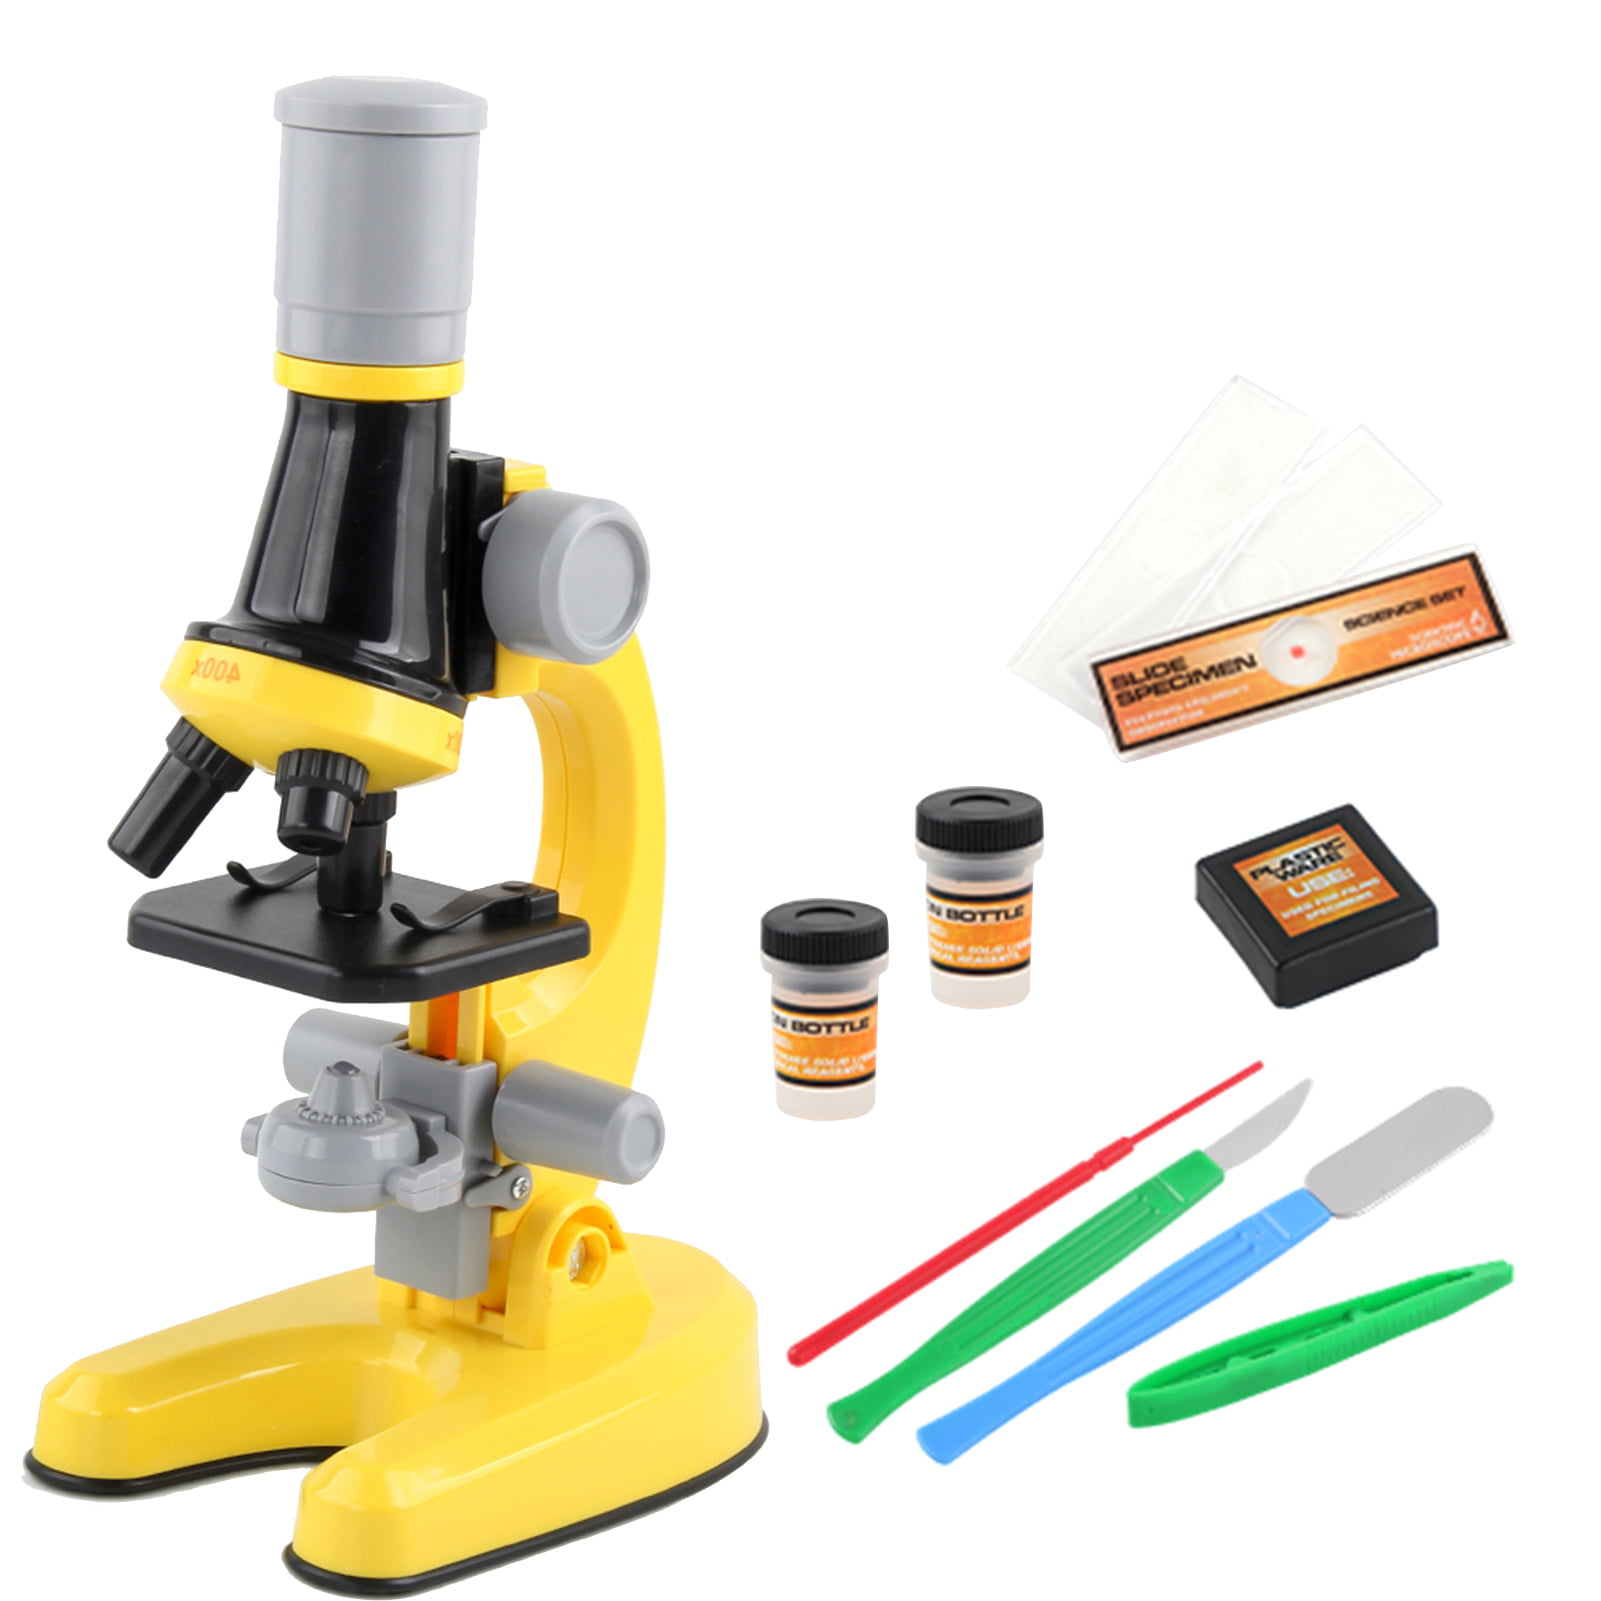 Besokuse Microscope for Kids，Upgraded Kids Microscope 100X/400X /1200X Science Experiment Toy. 